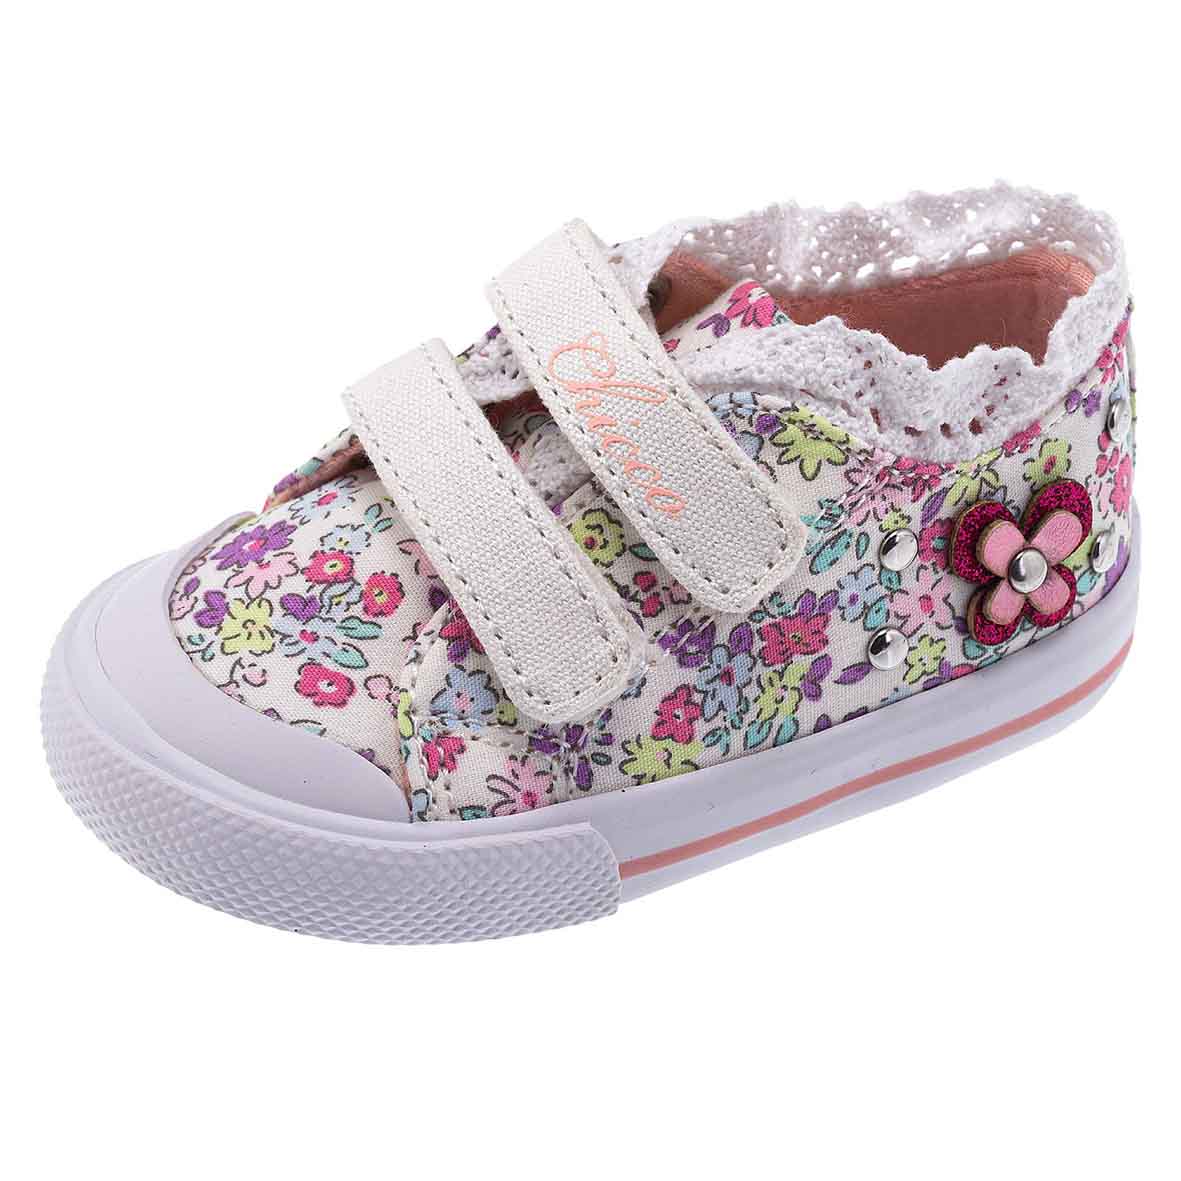 Chicco sneaker  gianet - Chicco